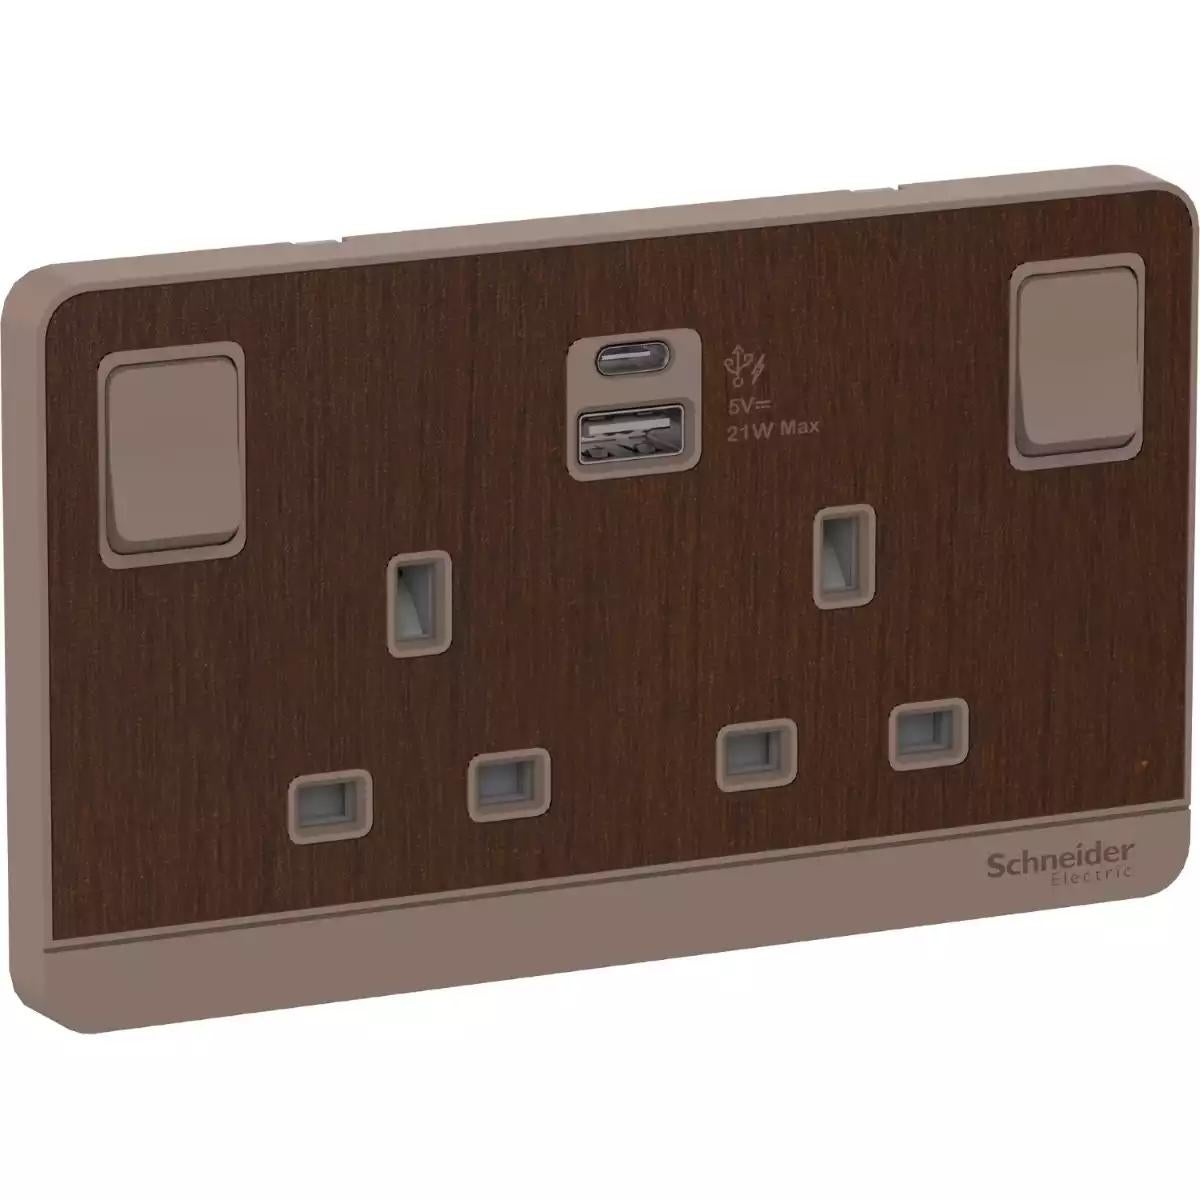 Switched socket with USB charger, Avataron, 21W type A+C, 2 gang, 13A, wood